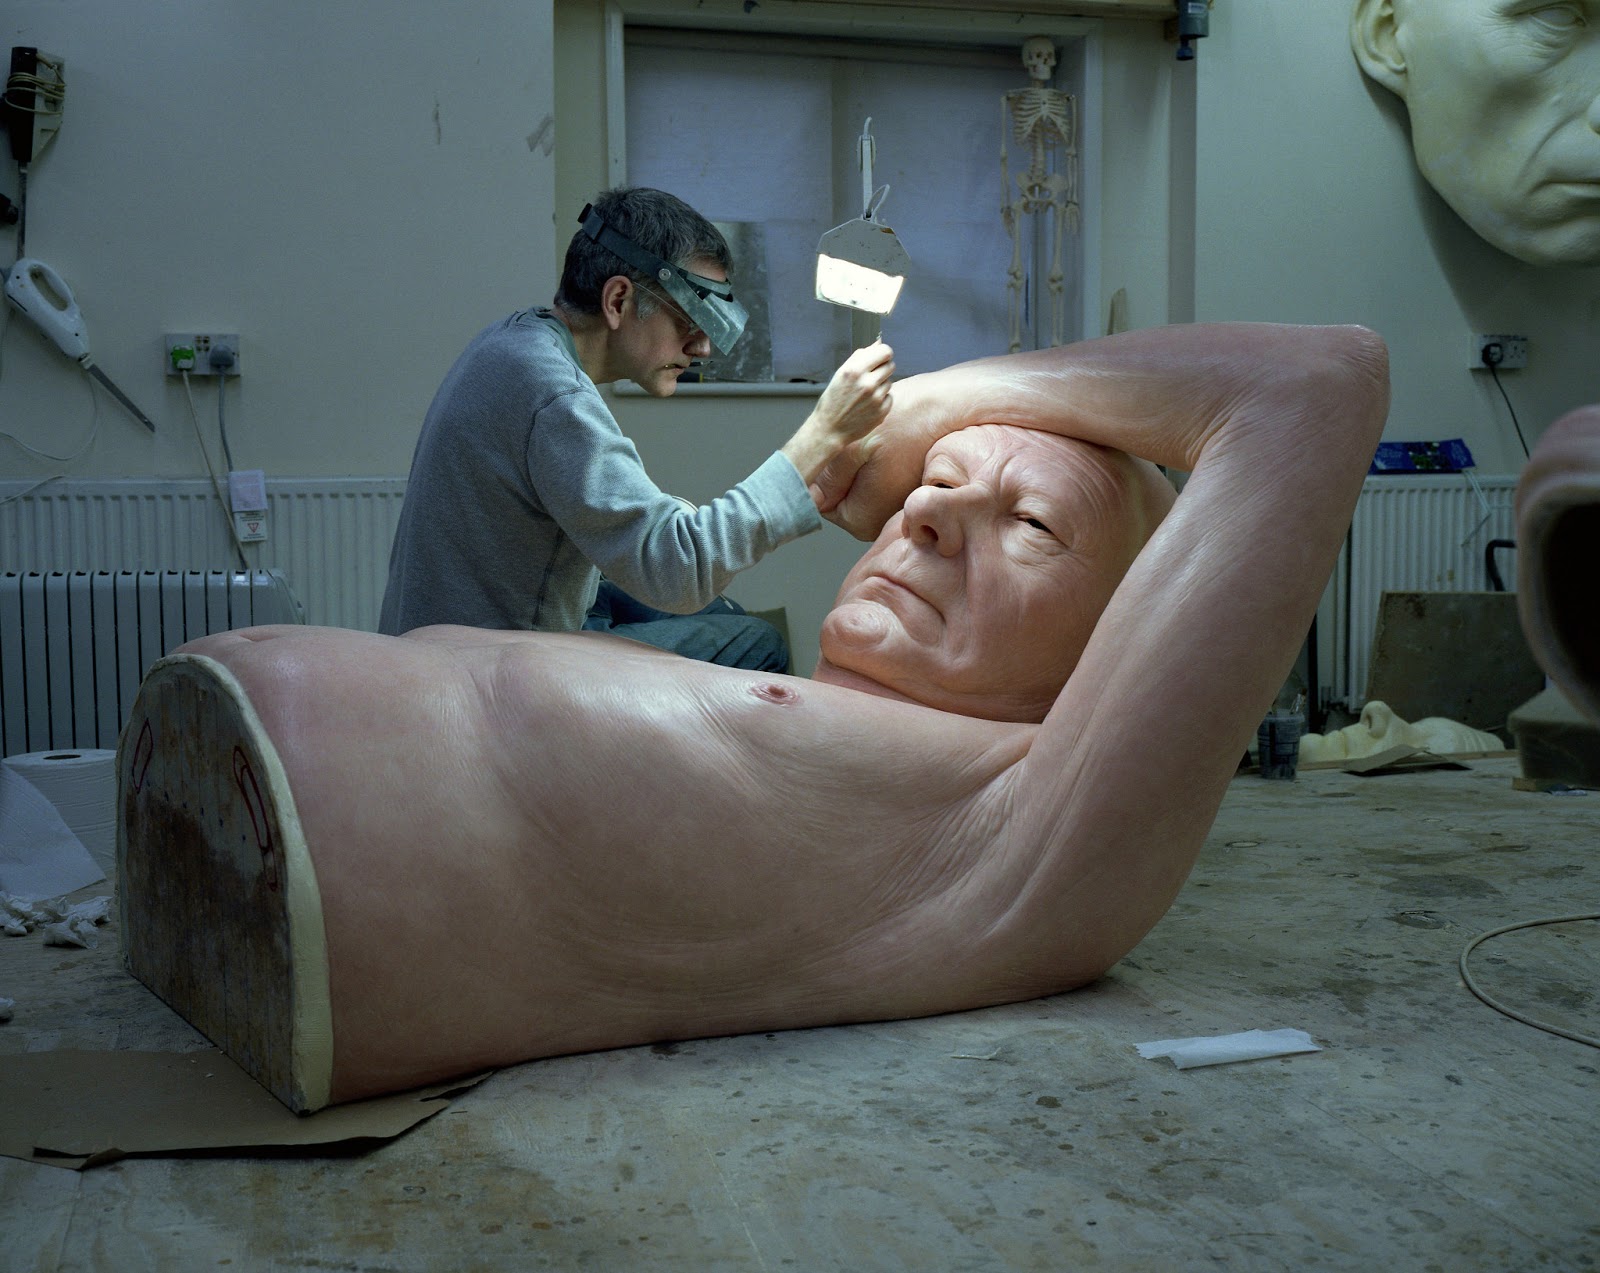 Using resin, fiberglass, silicone, and many other materials, Mueck constructs hyperrealistic likenesses of human beings, while playing with scale.